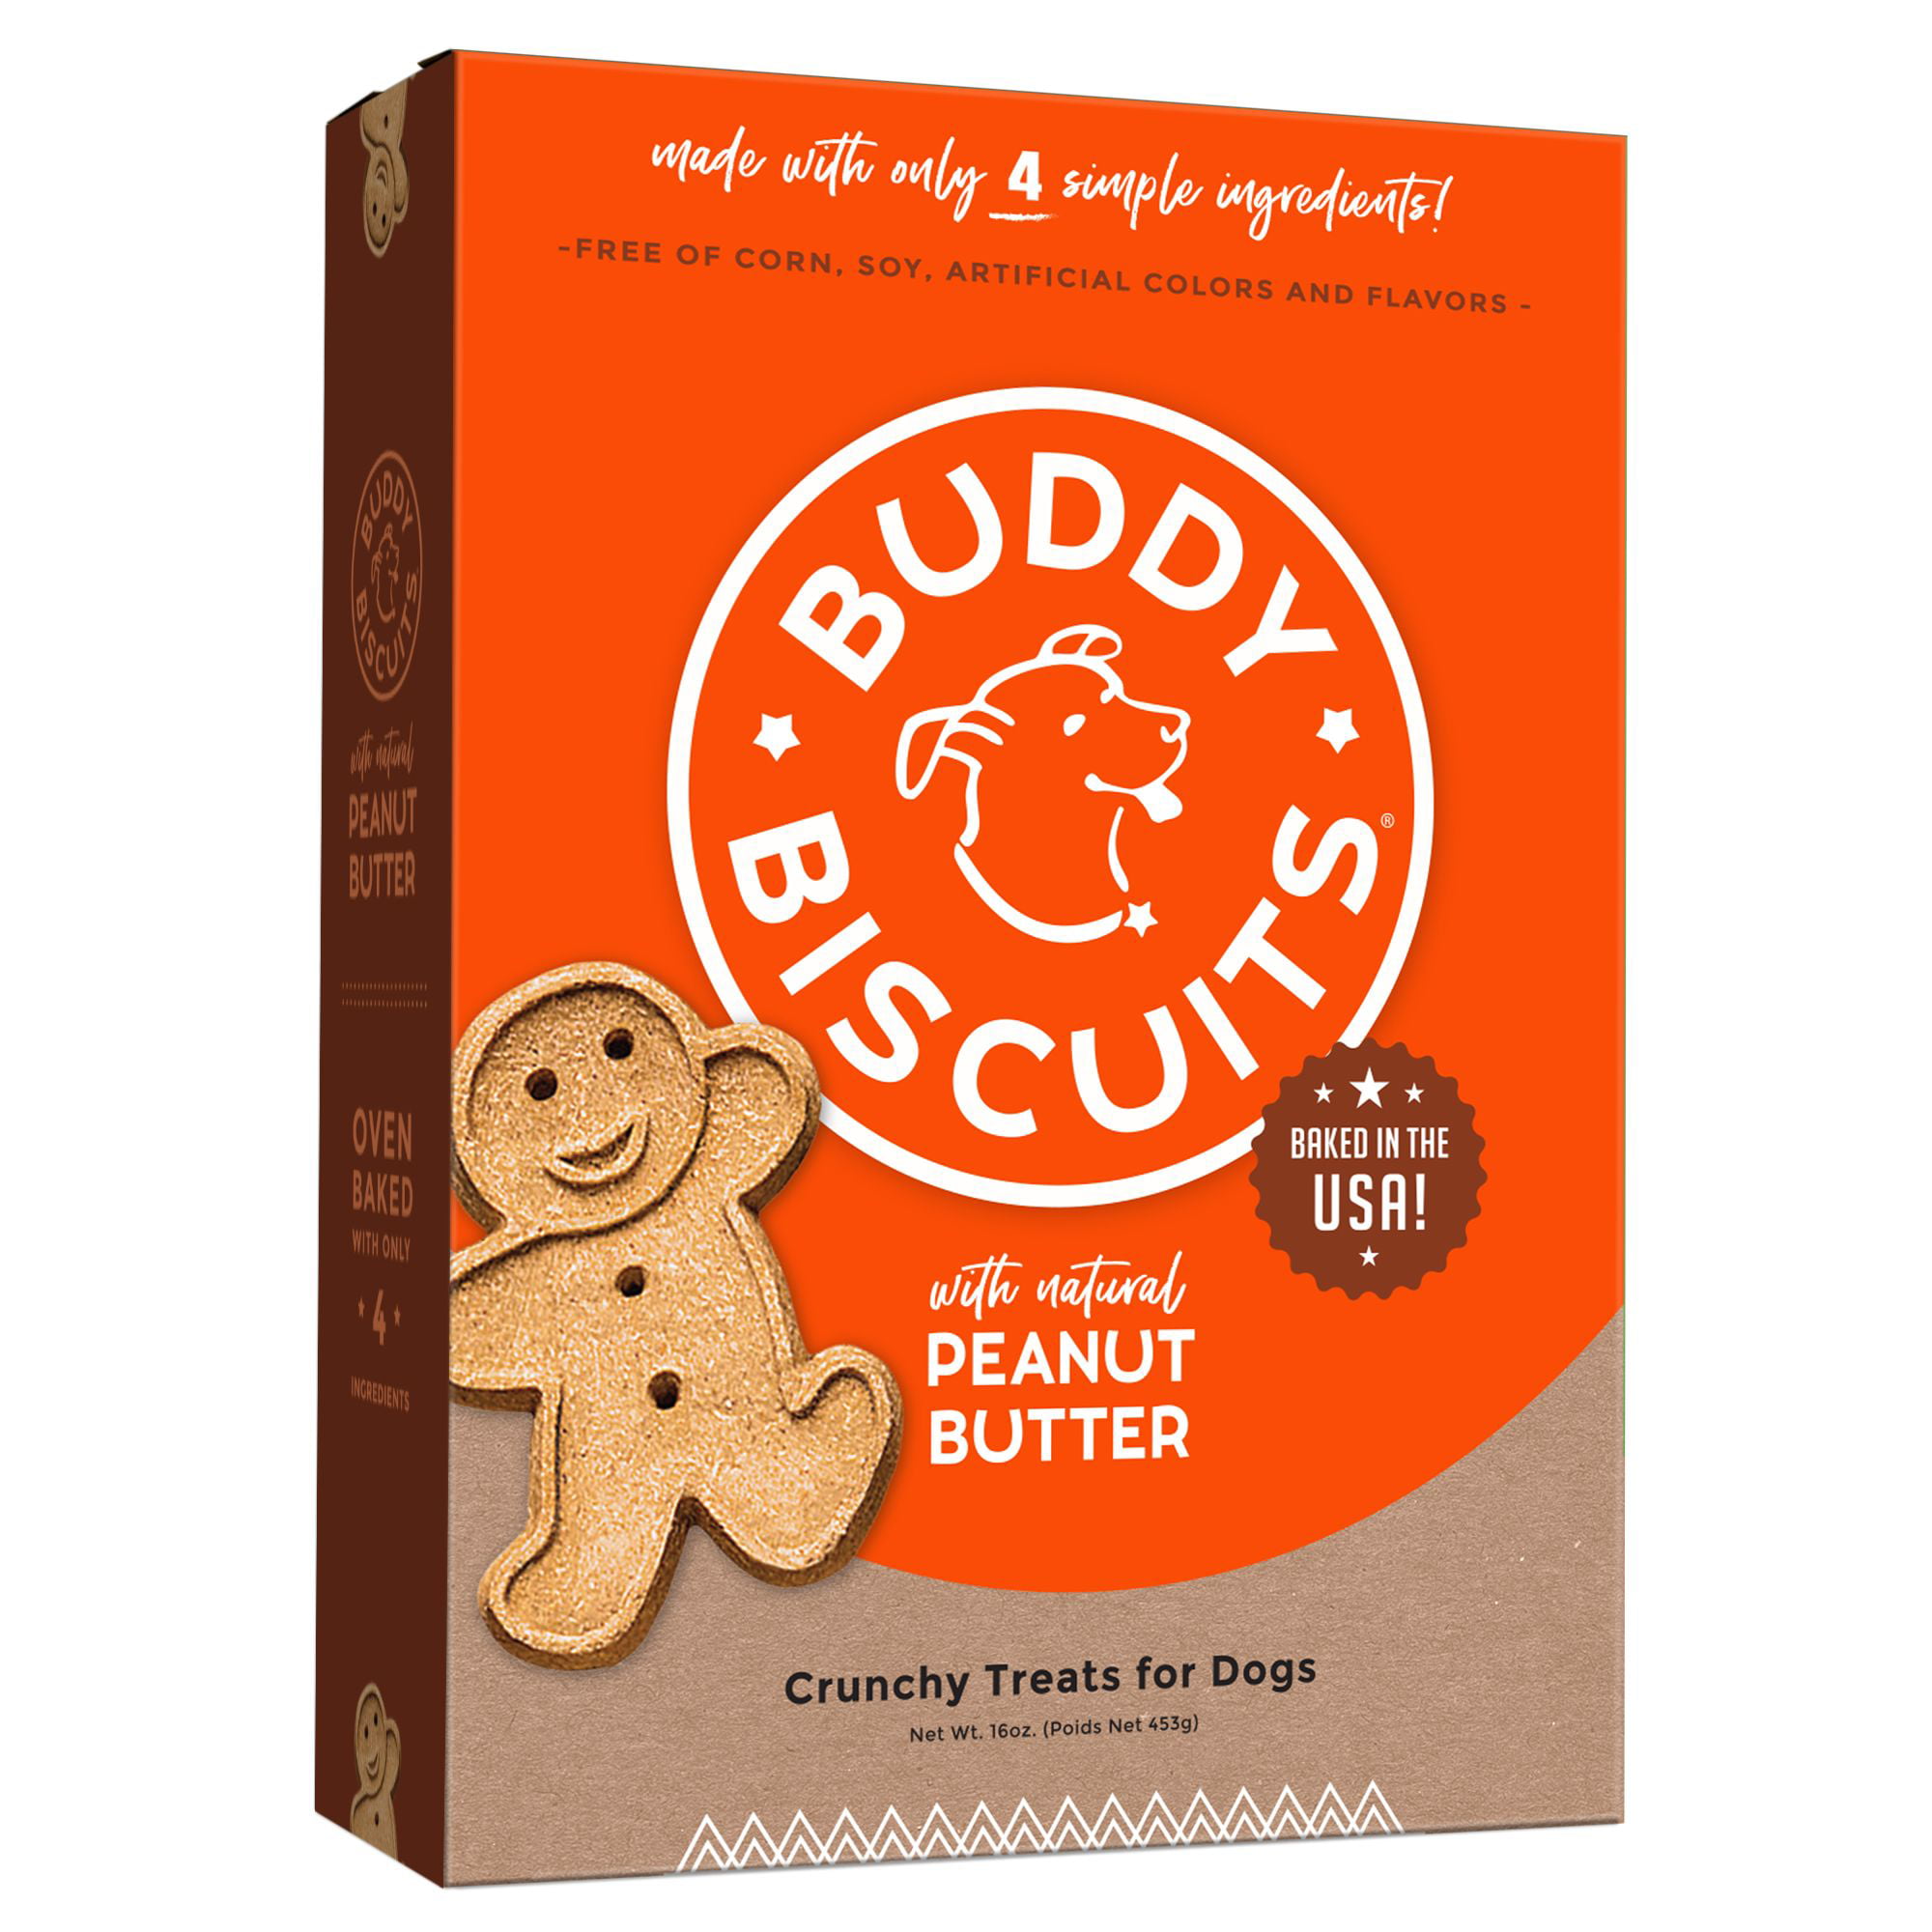 Cloud Star Buddy Biscuits Oven Baked 